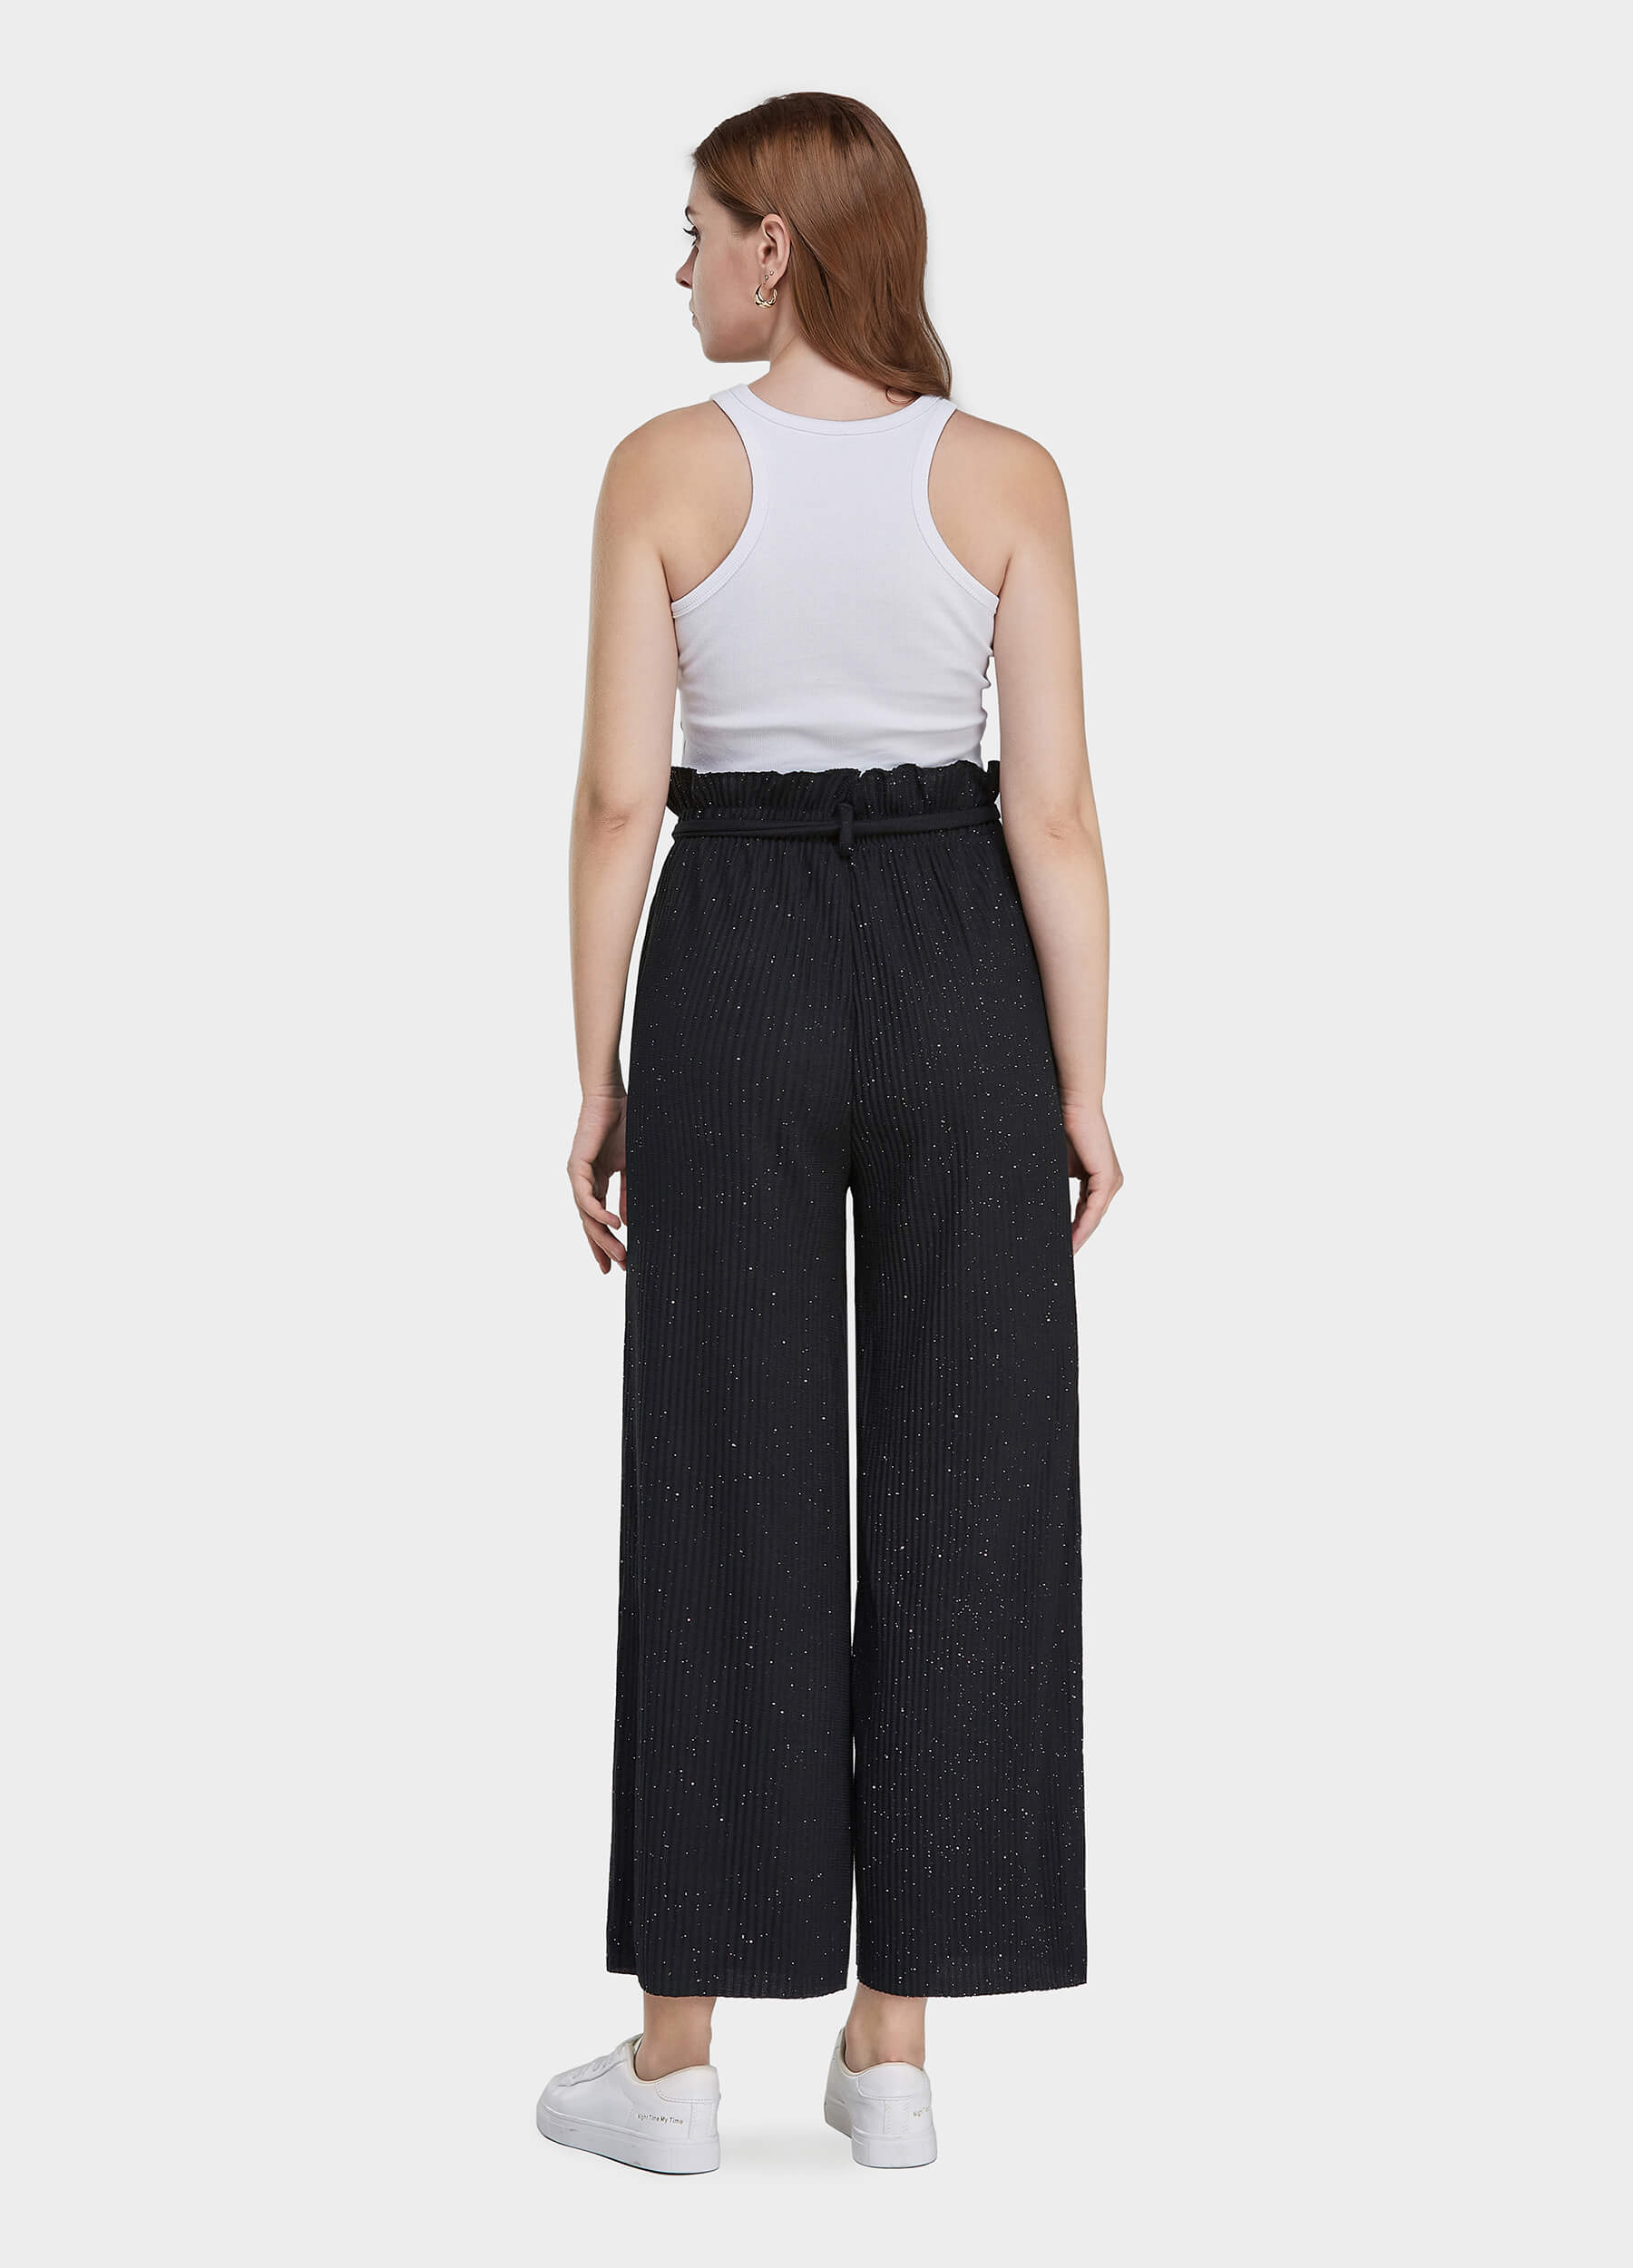 Women's Ruffle Trims Belted Comfort Wide Leg Trousers-Black back view